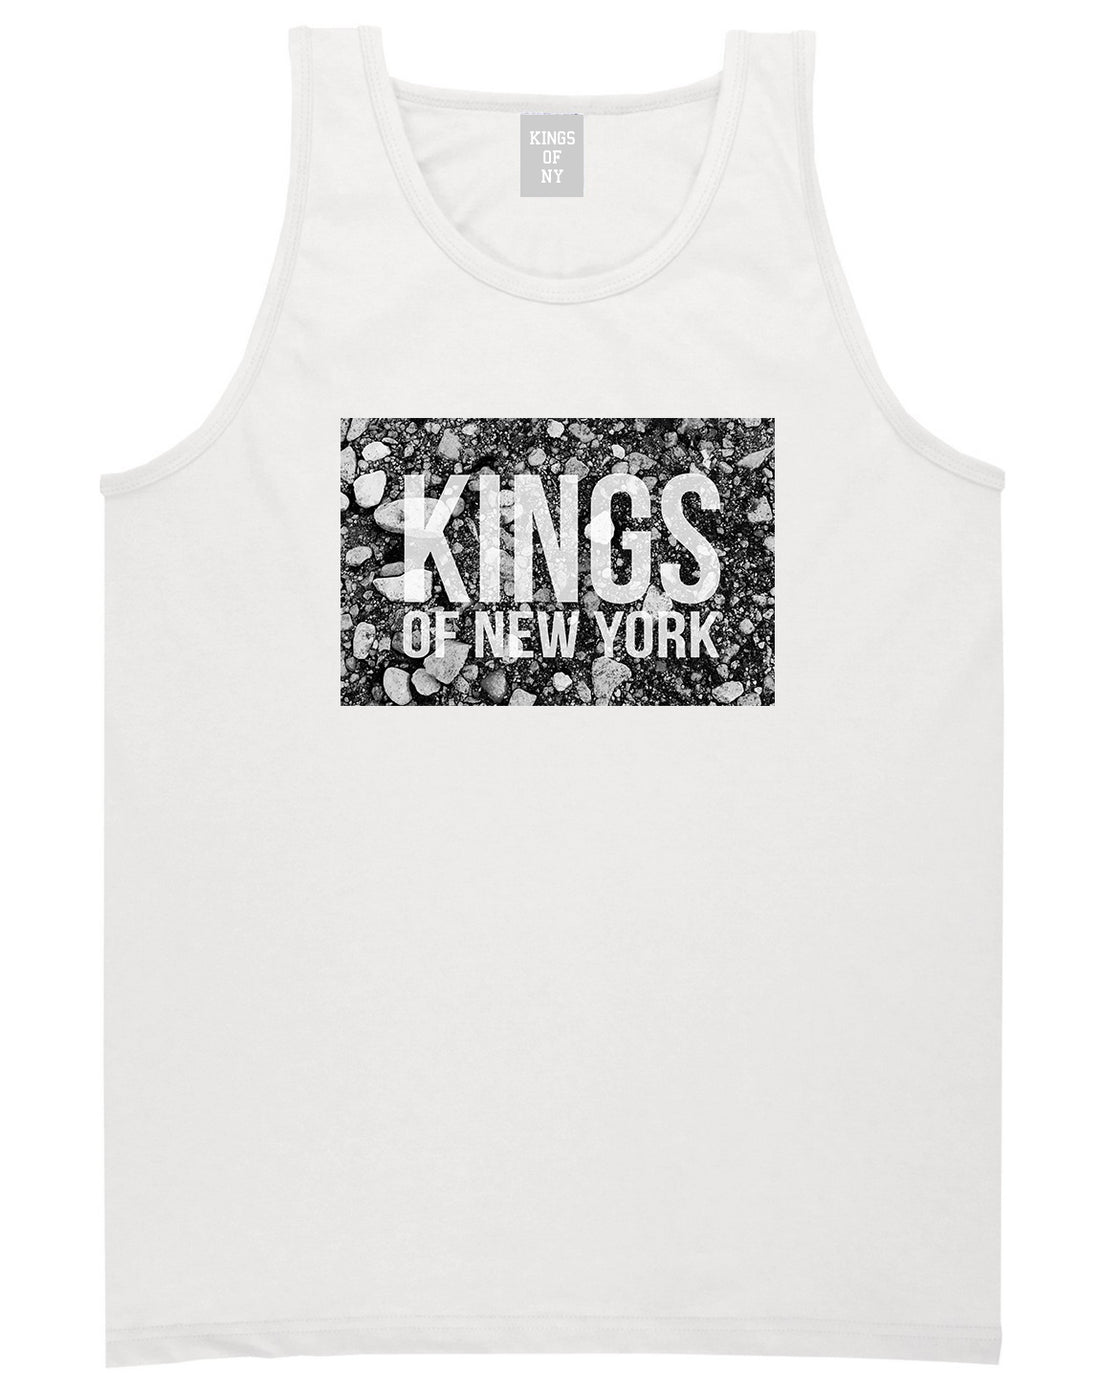 Came From The Dirt KONY Mens Tank Top Shirt White